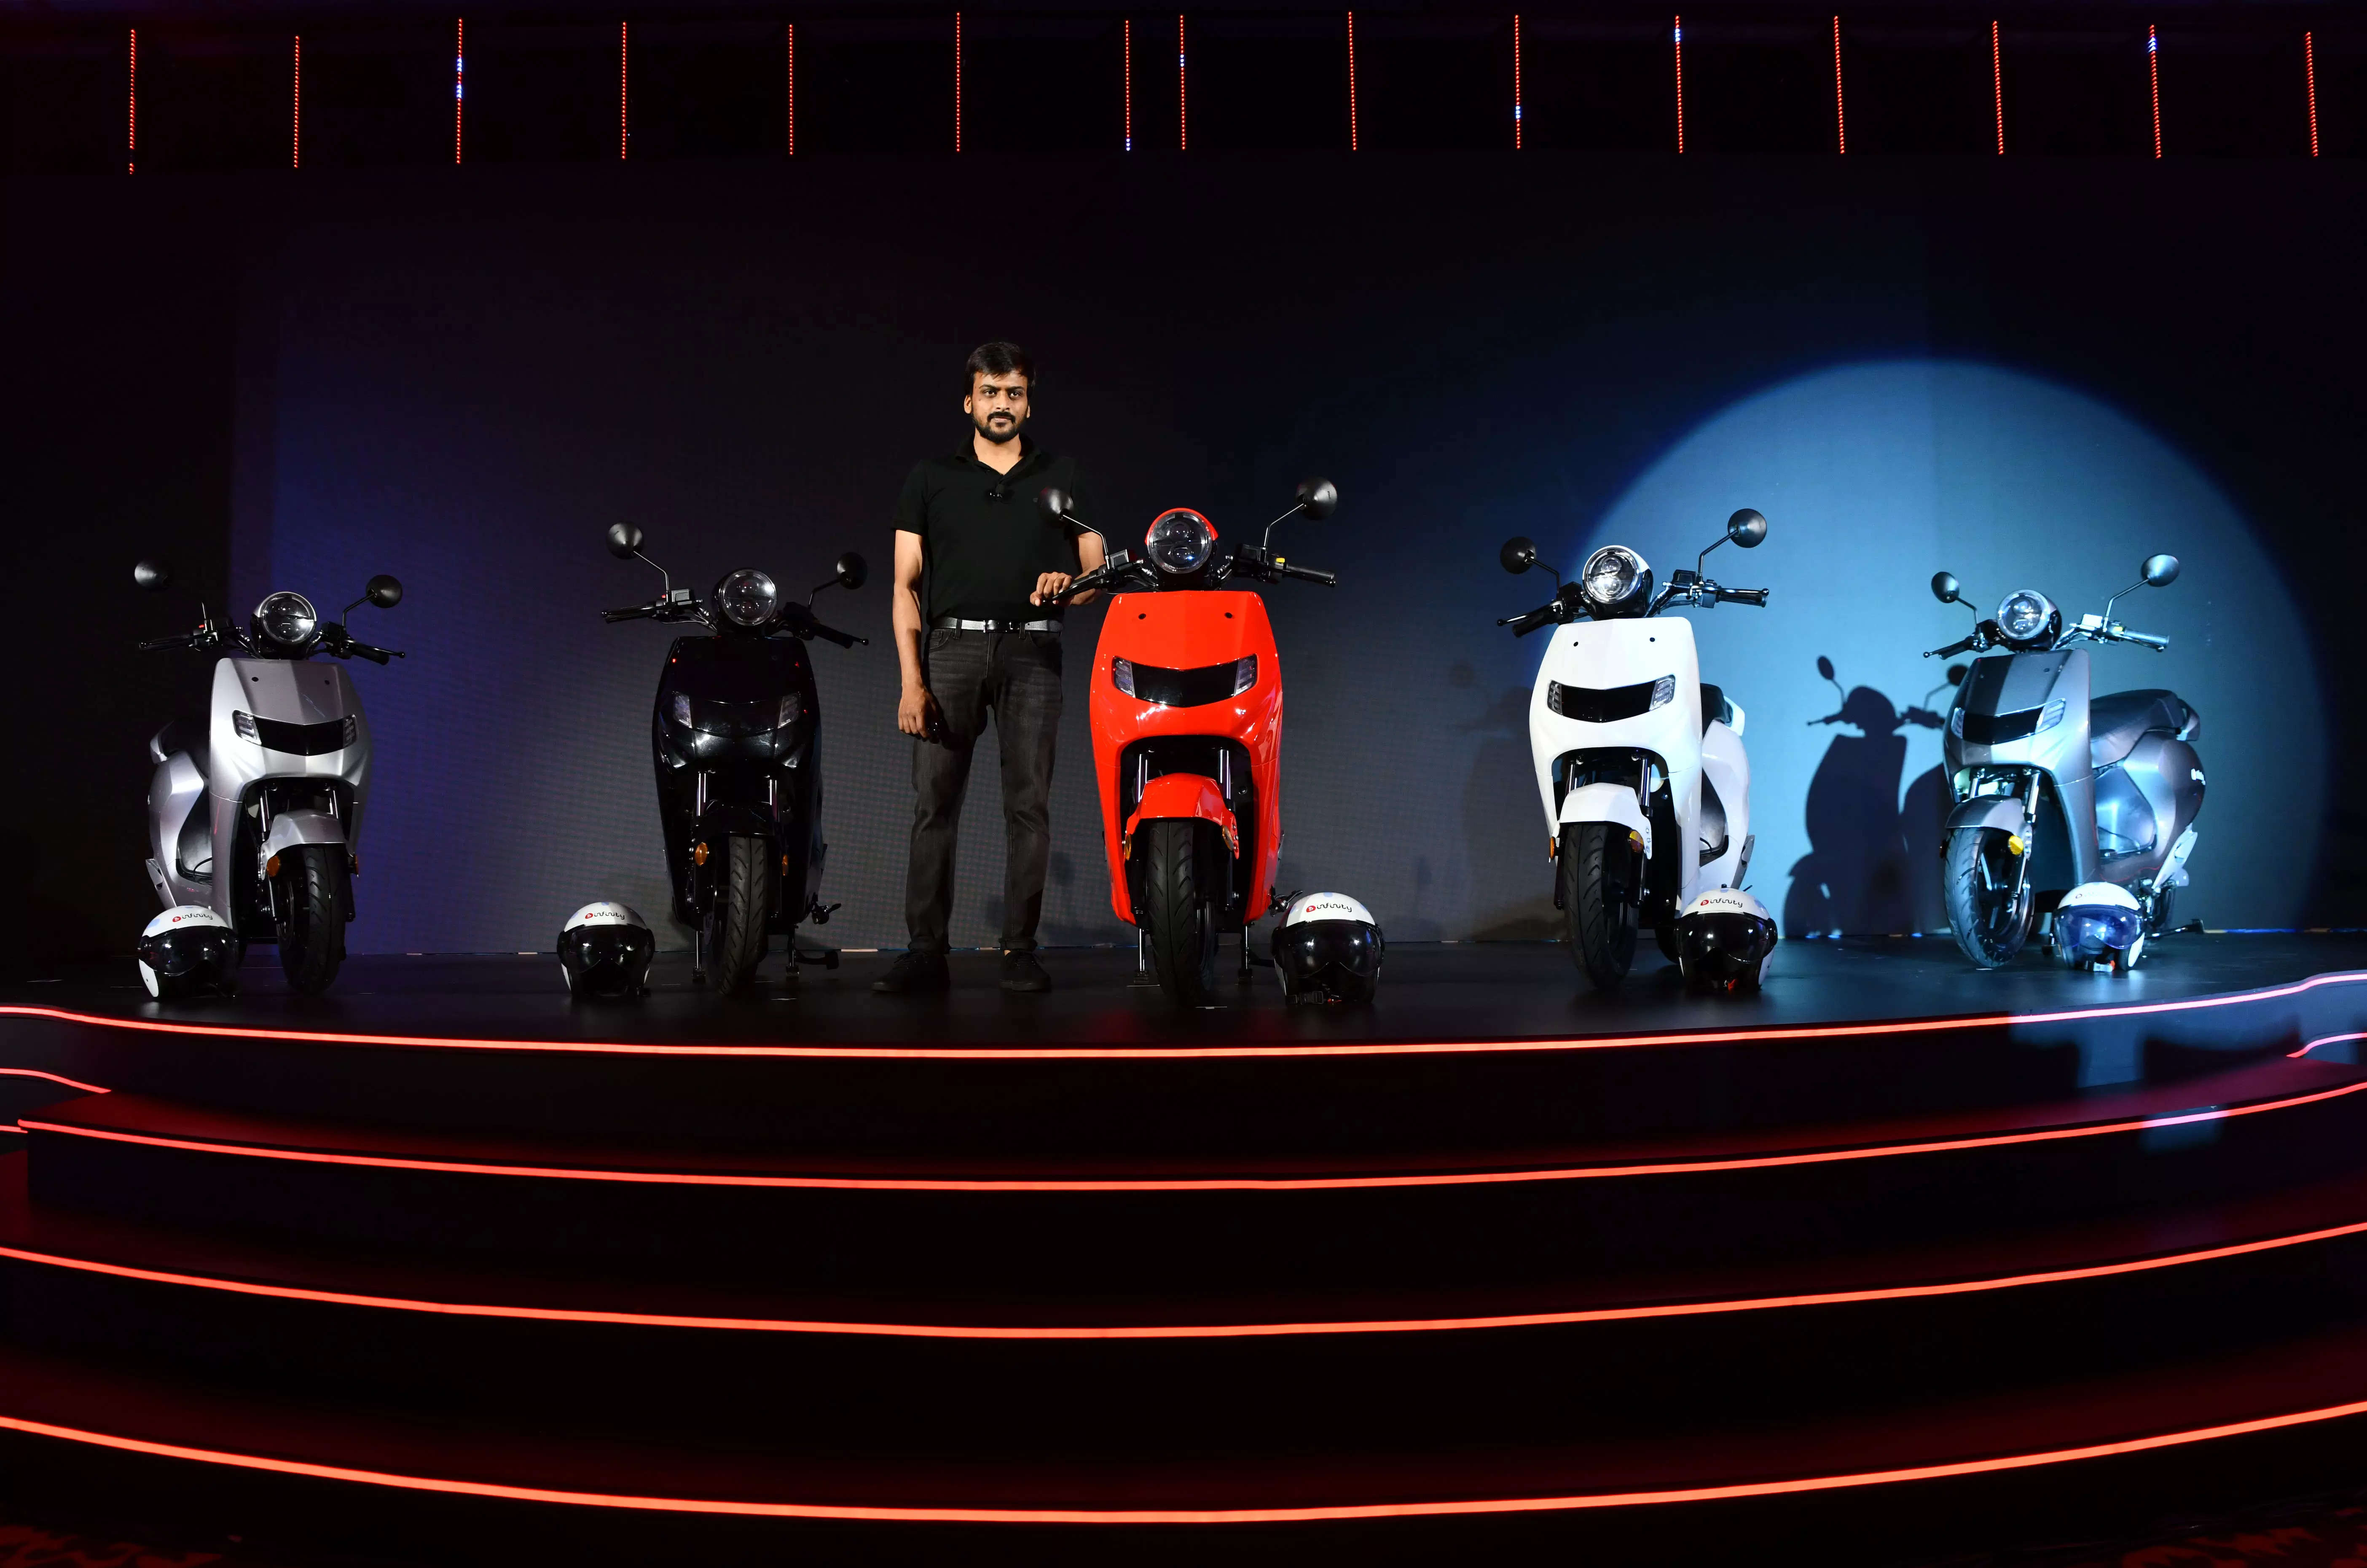 &quot;We will do whatever it takes to build. The market is large--nearly 2 crore scooters are sold in the country which within 3-4 years will become 4 crore and the EV penetration is still very small,&quot; says Vivekananda Hellekere, CEO and co-founder, Bounce.